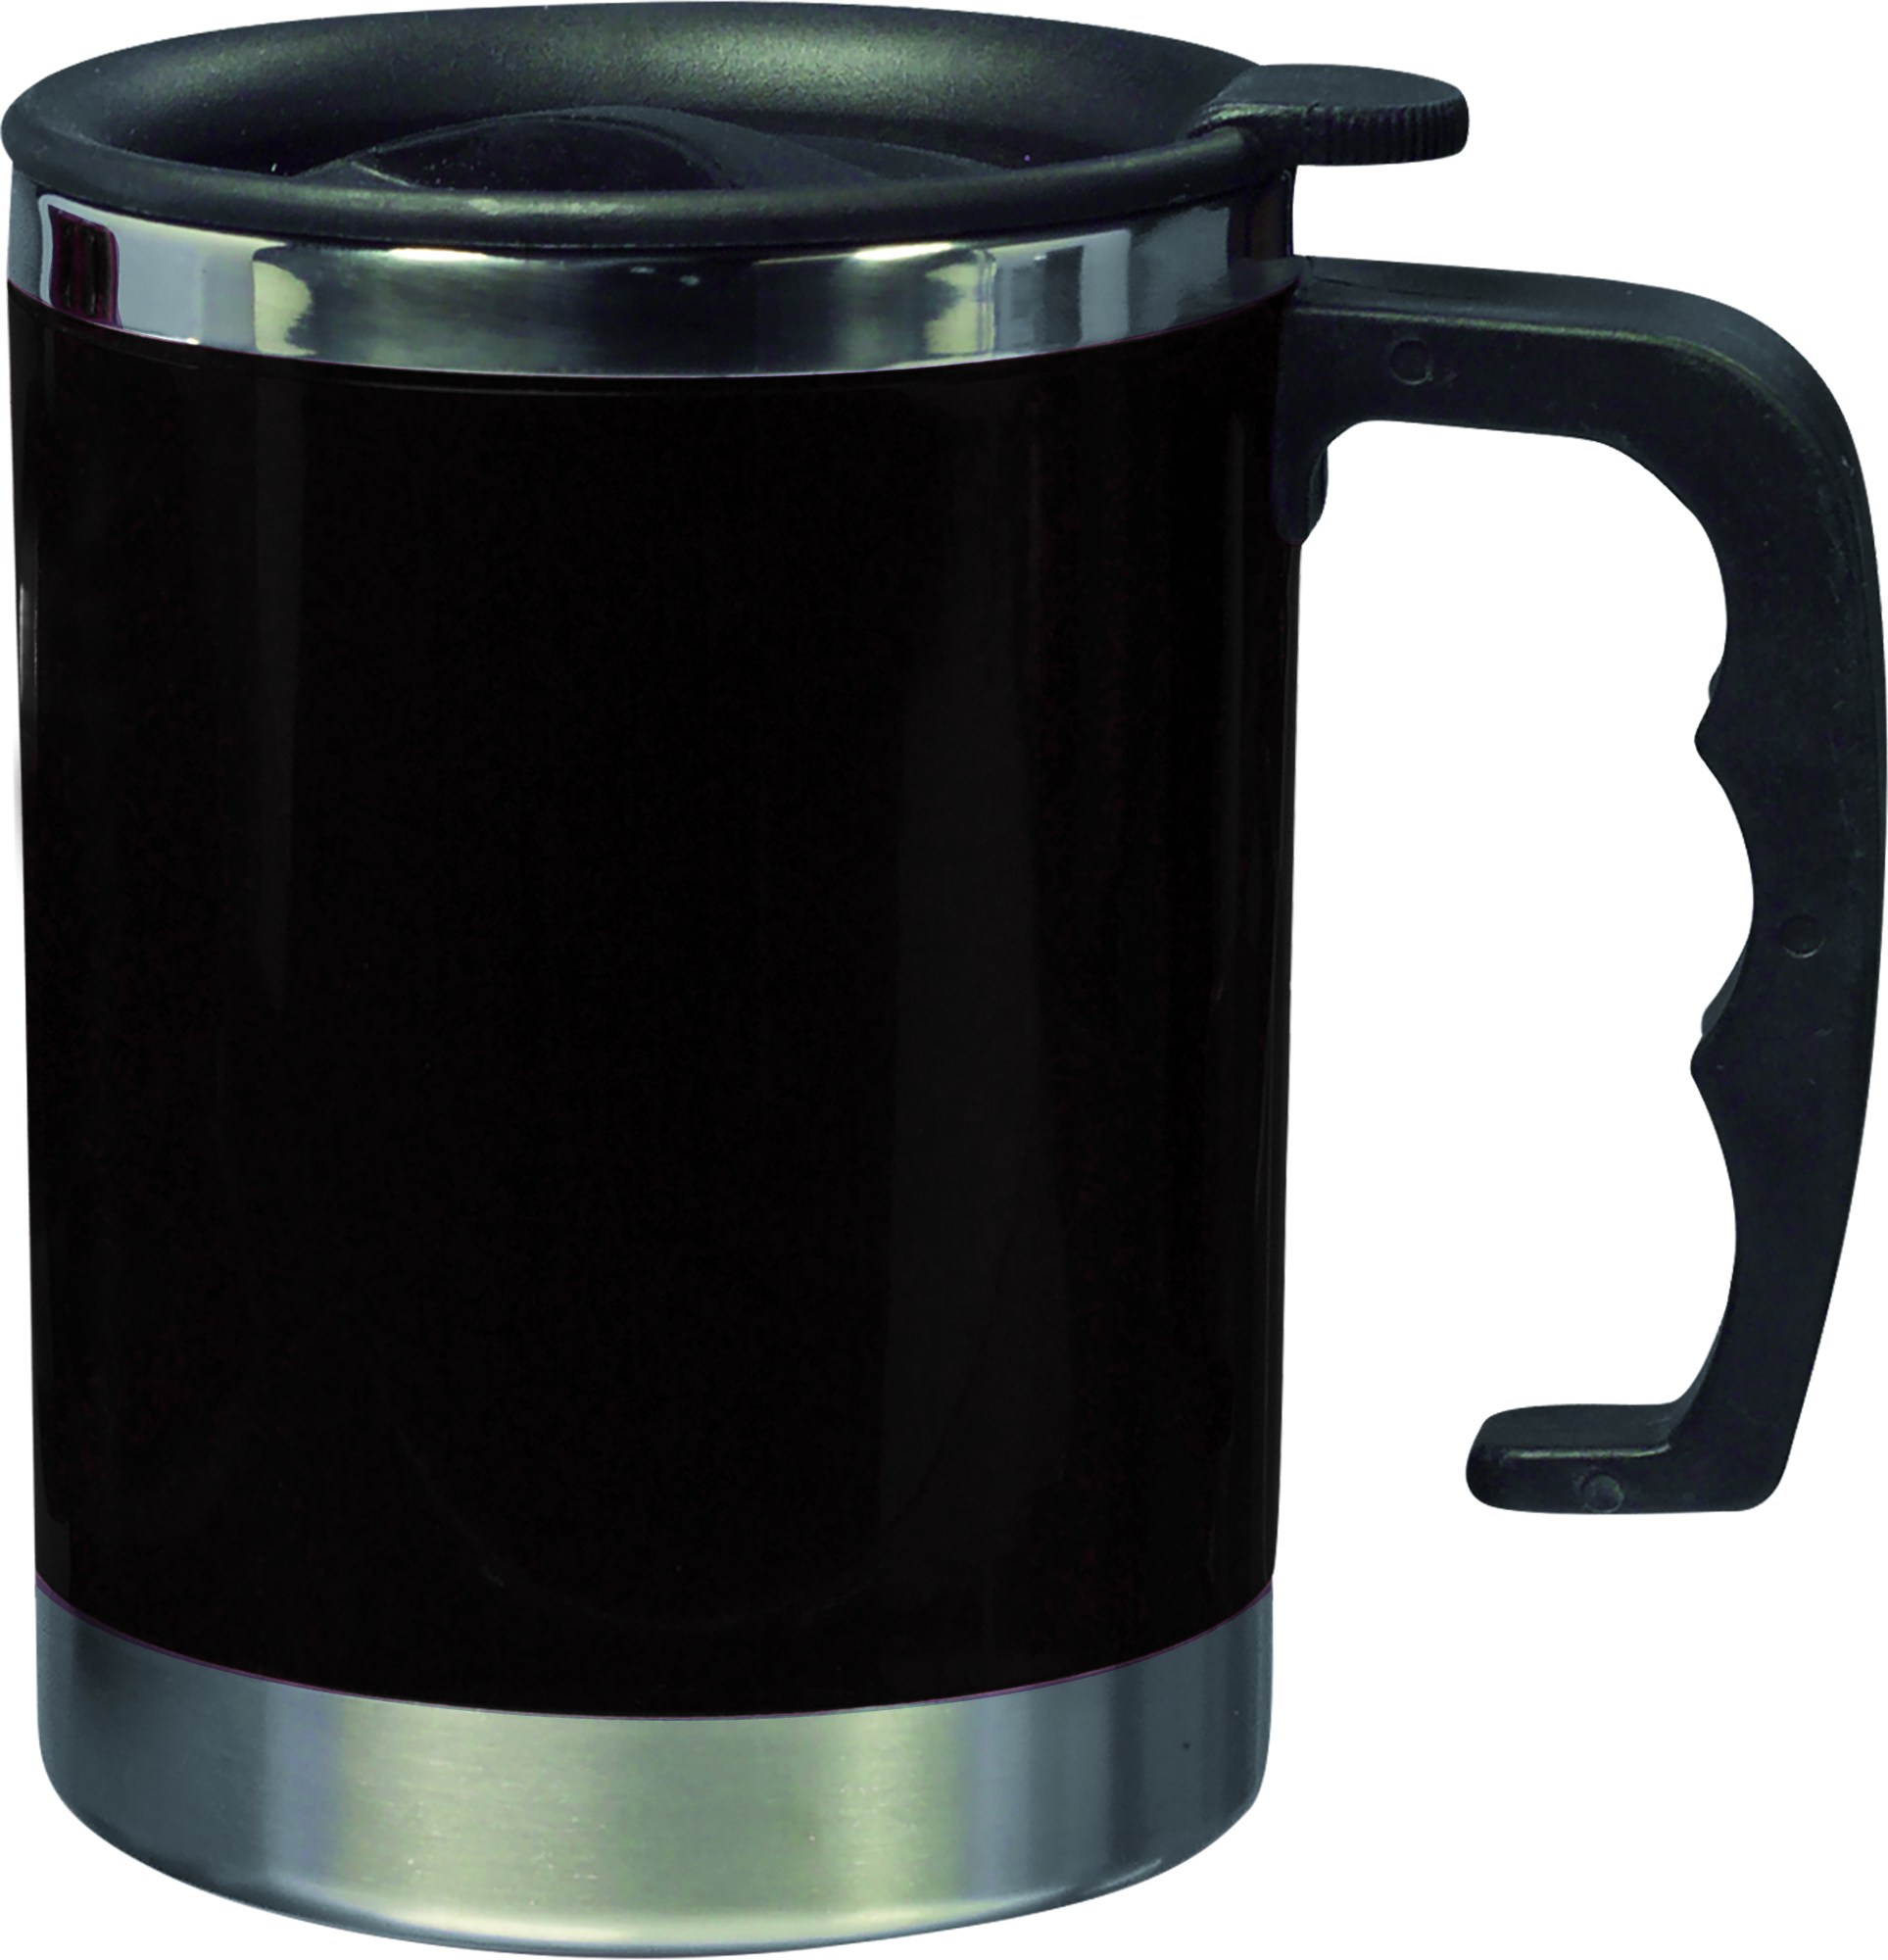 004658 001999999 2d000 rgt pro01 fal - Stainless steel mug